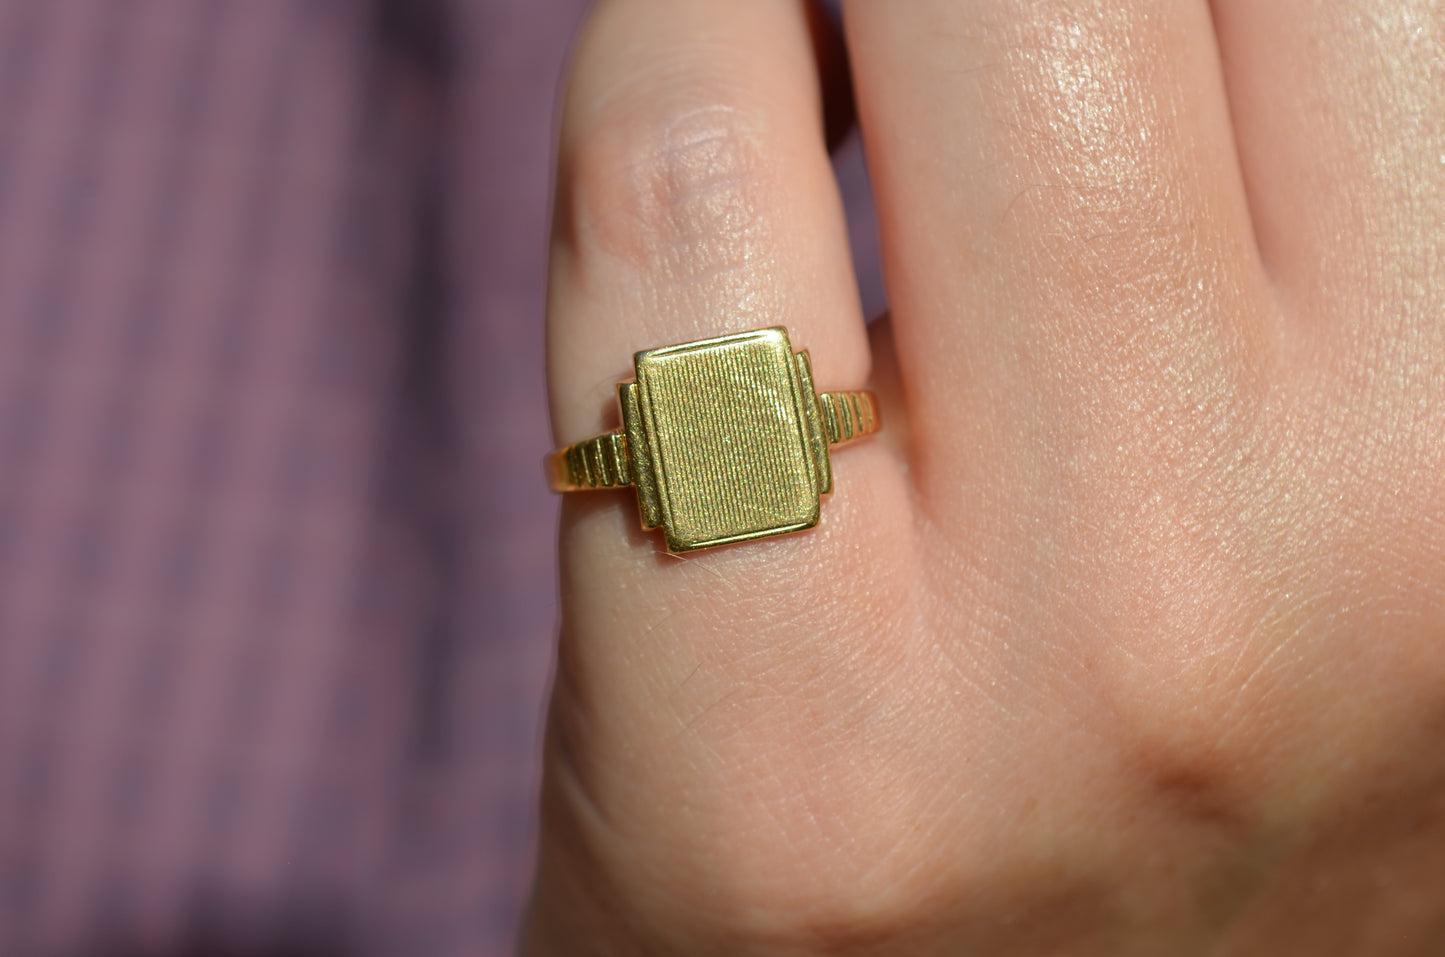 A closely cropped view of the ring on a Caucasian model's left pinky finger.